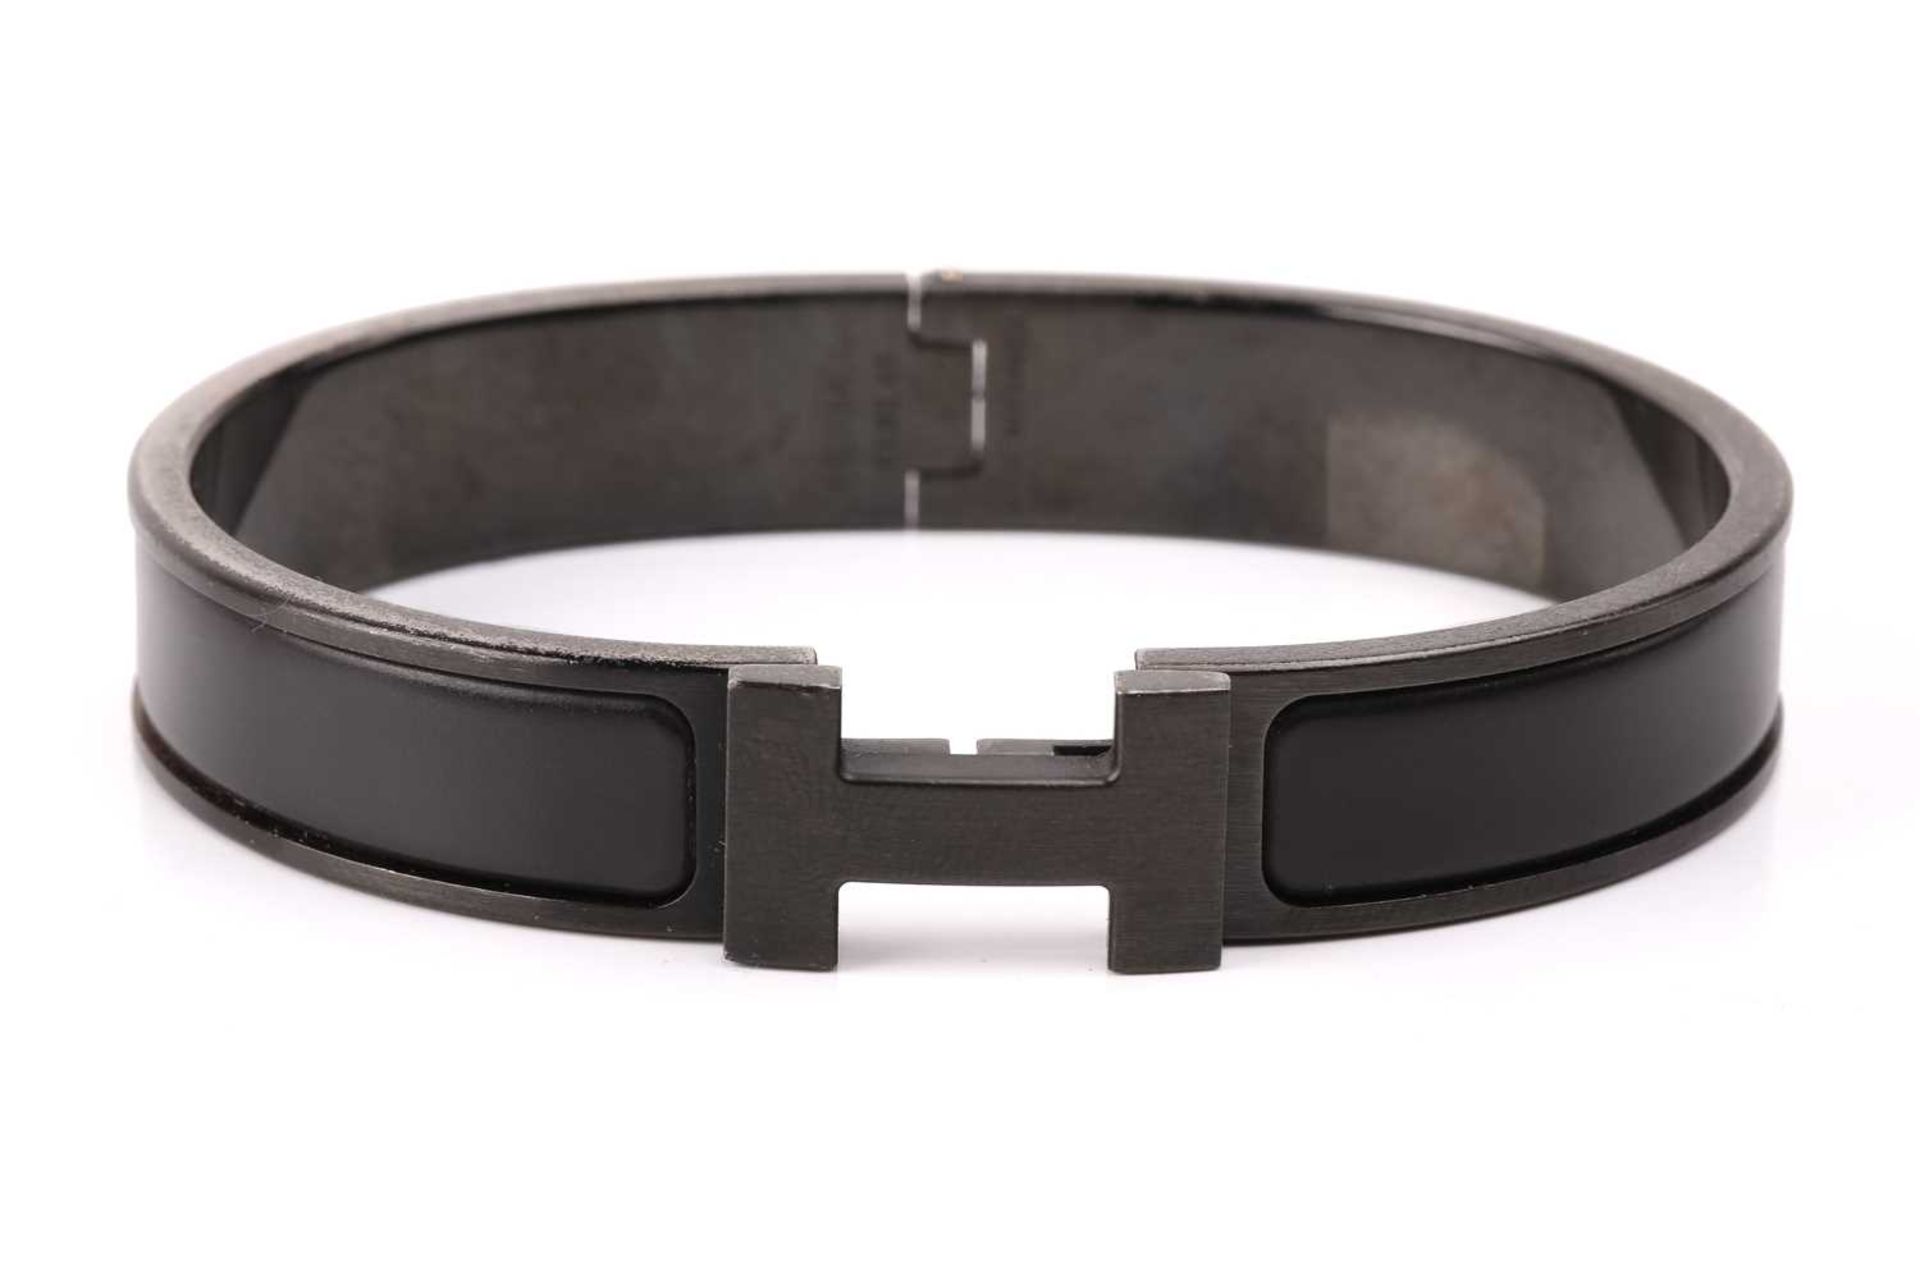 Hermès - a narrow 'Clic HH So Black' bracelet with matte enamel and plated hardware, signed and